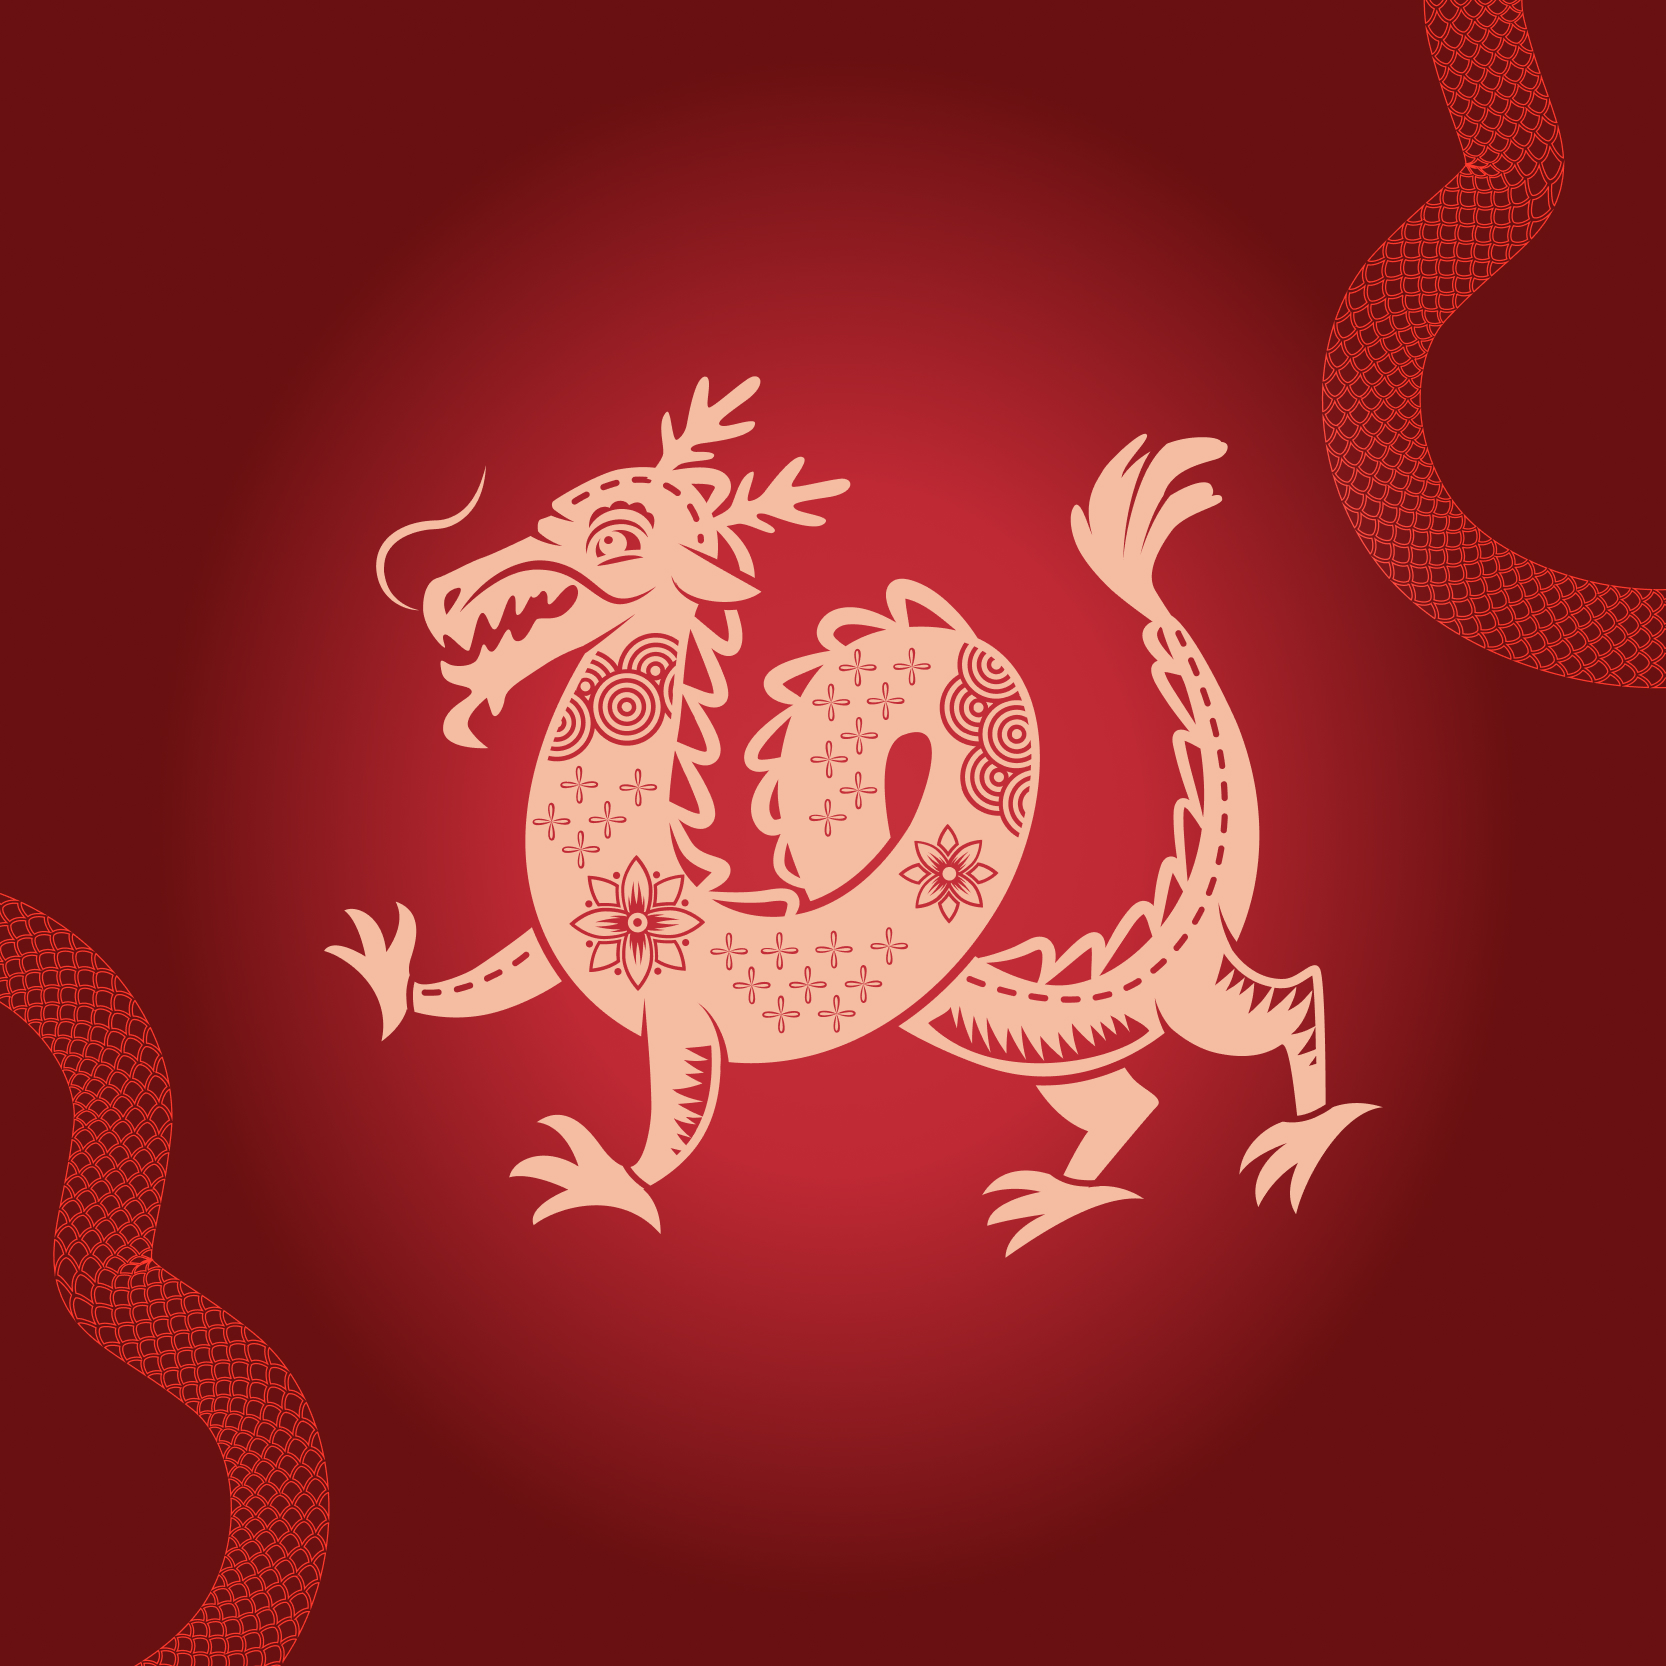 YEAR OF THE DRAGON